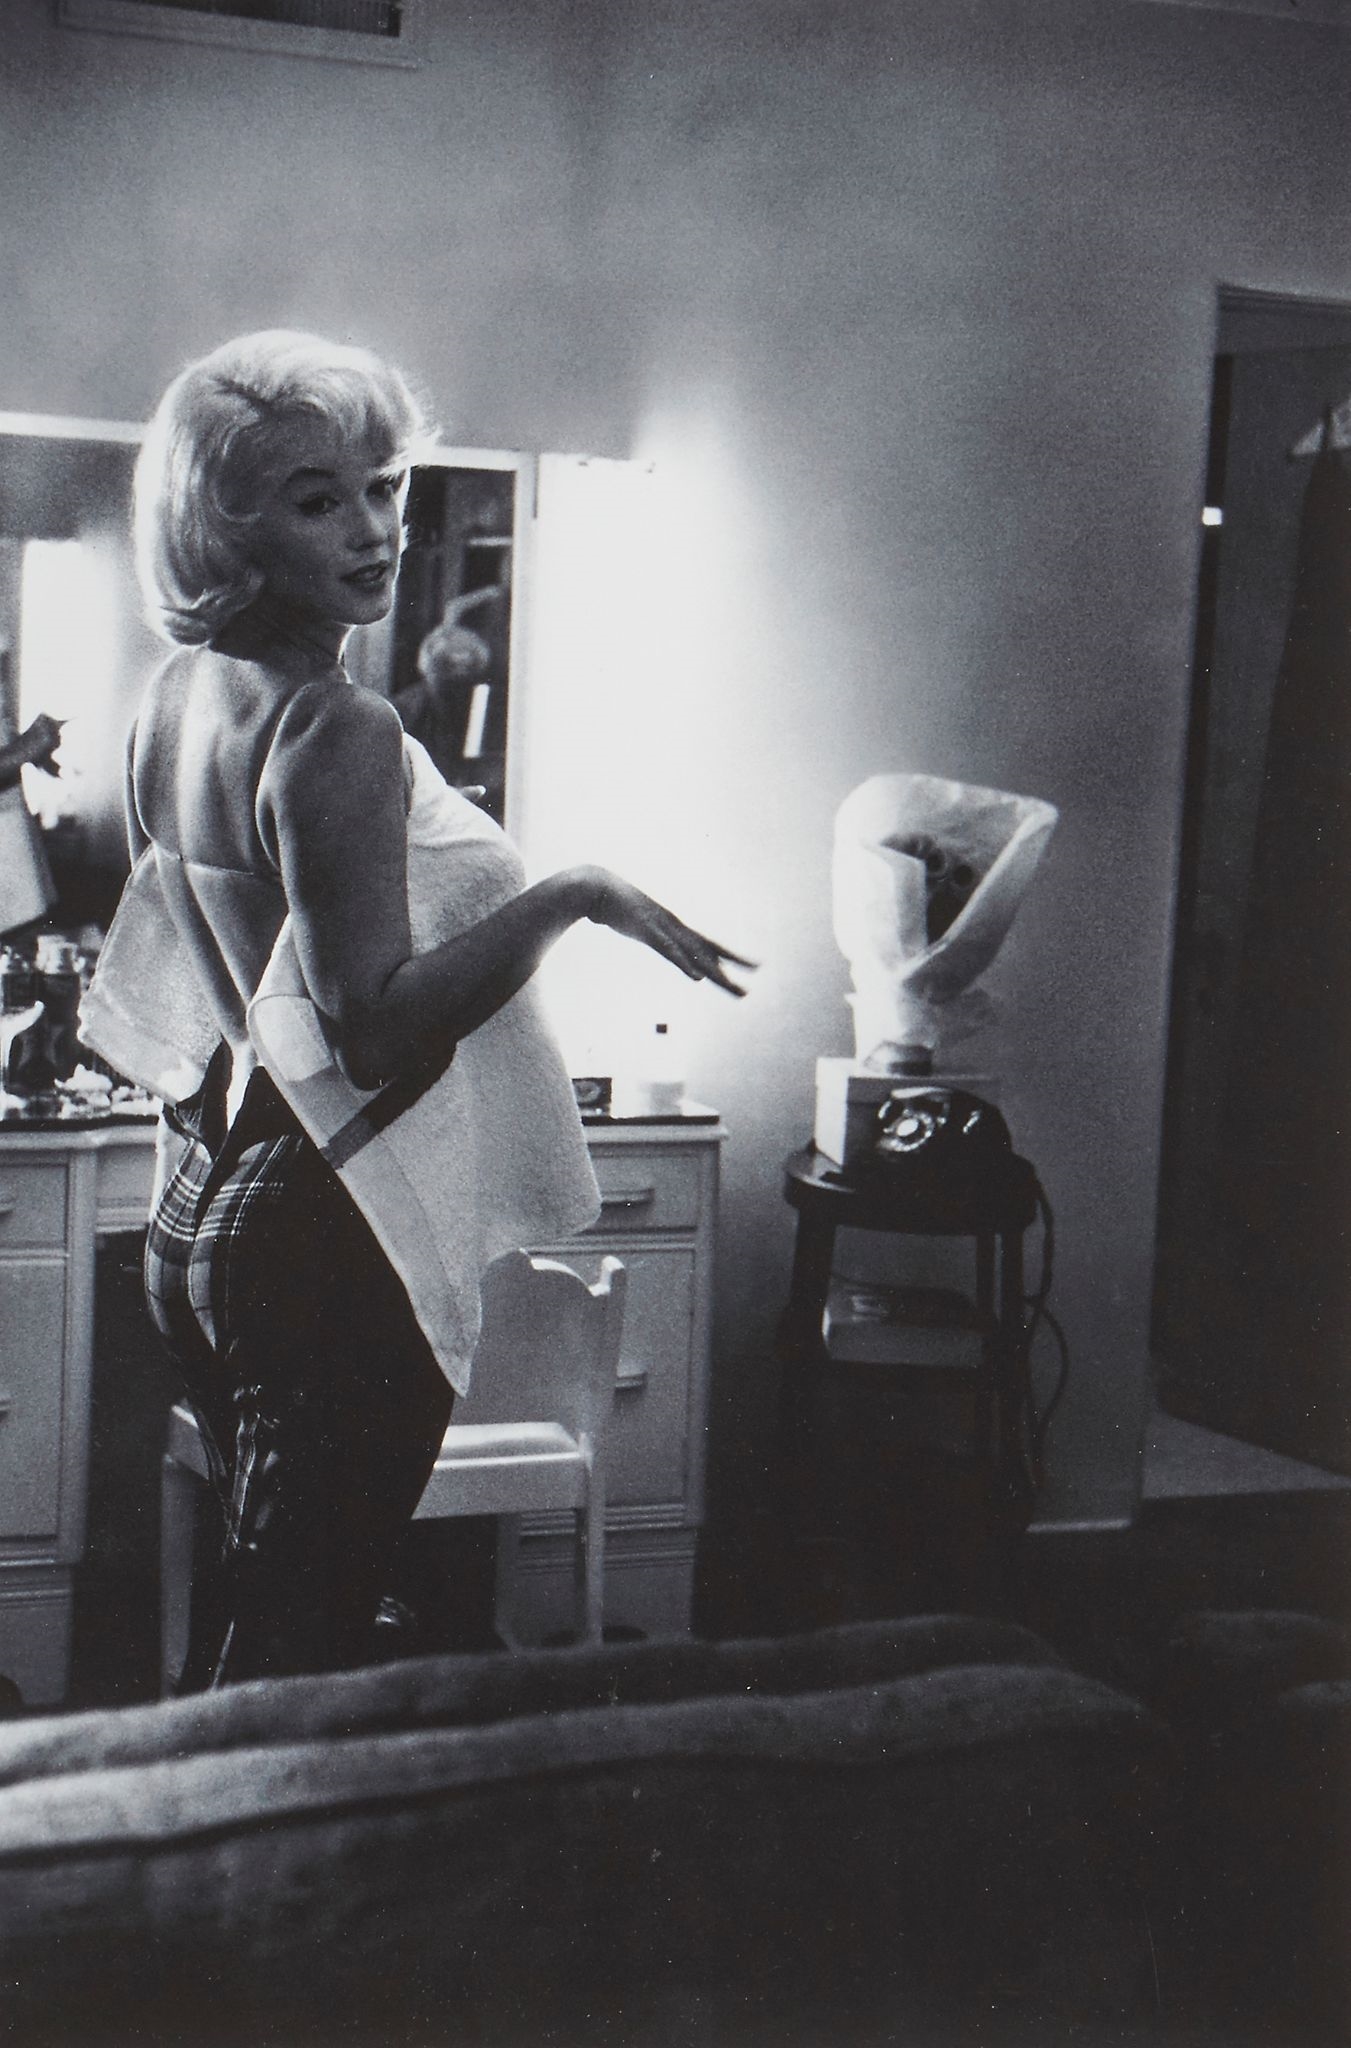 Artwork by Eve Arnold, Marilyn Monroe, Getting Ready, Made of Giclee print